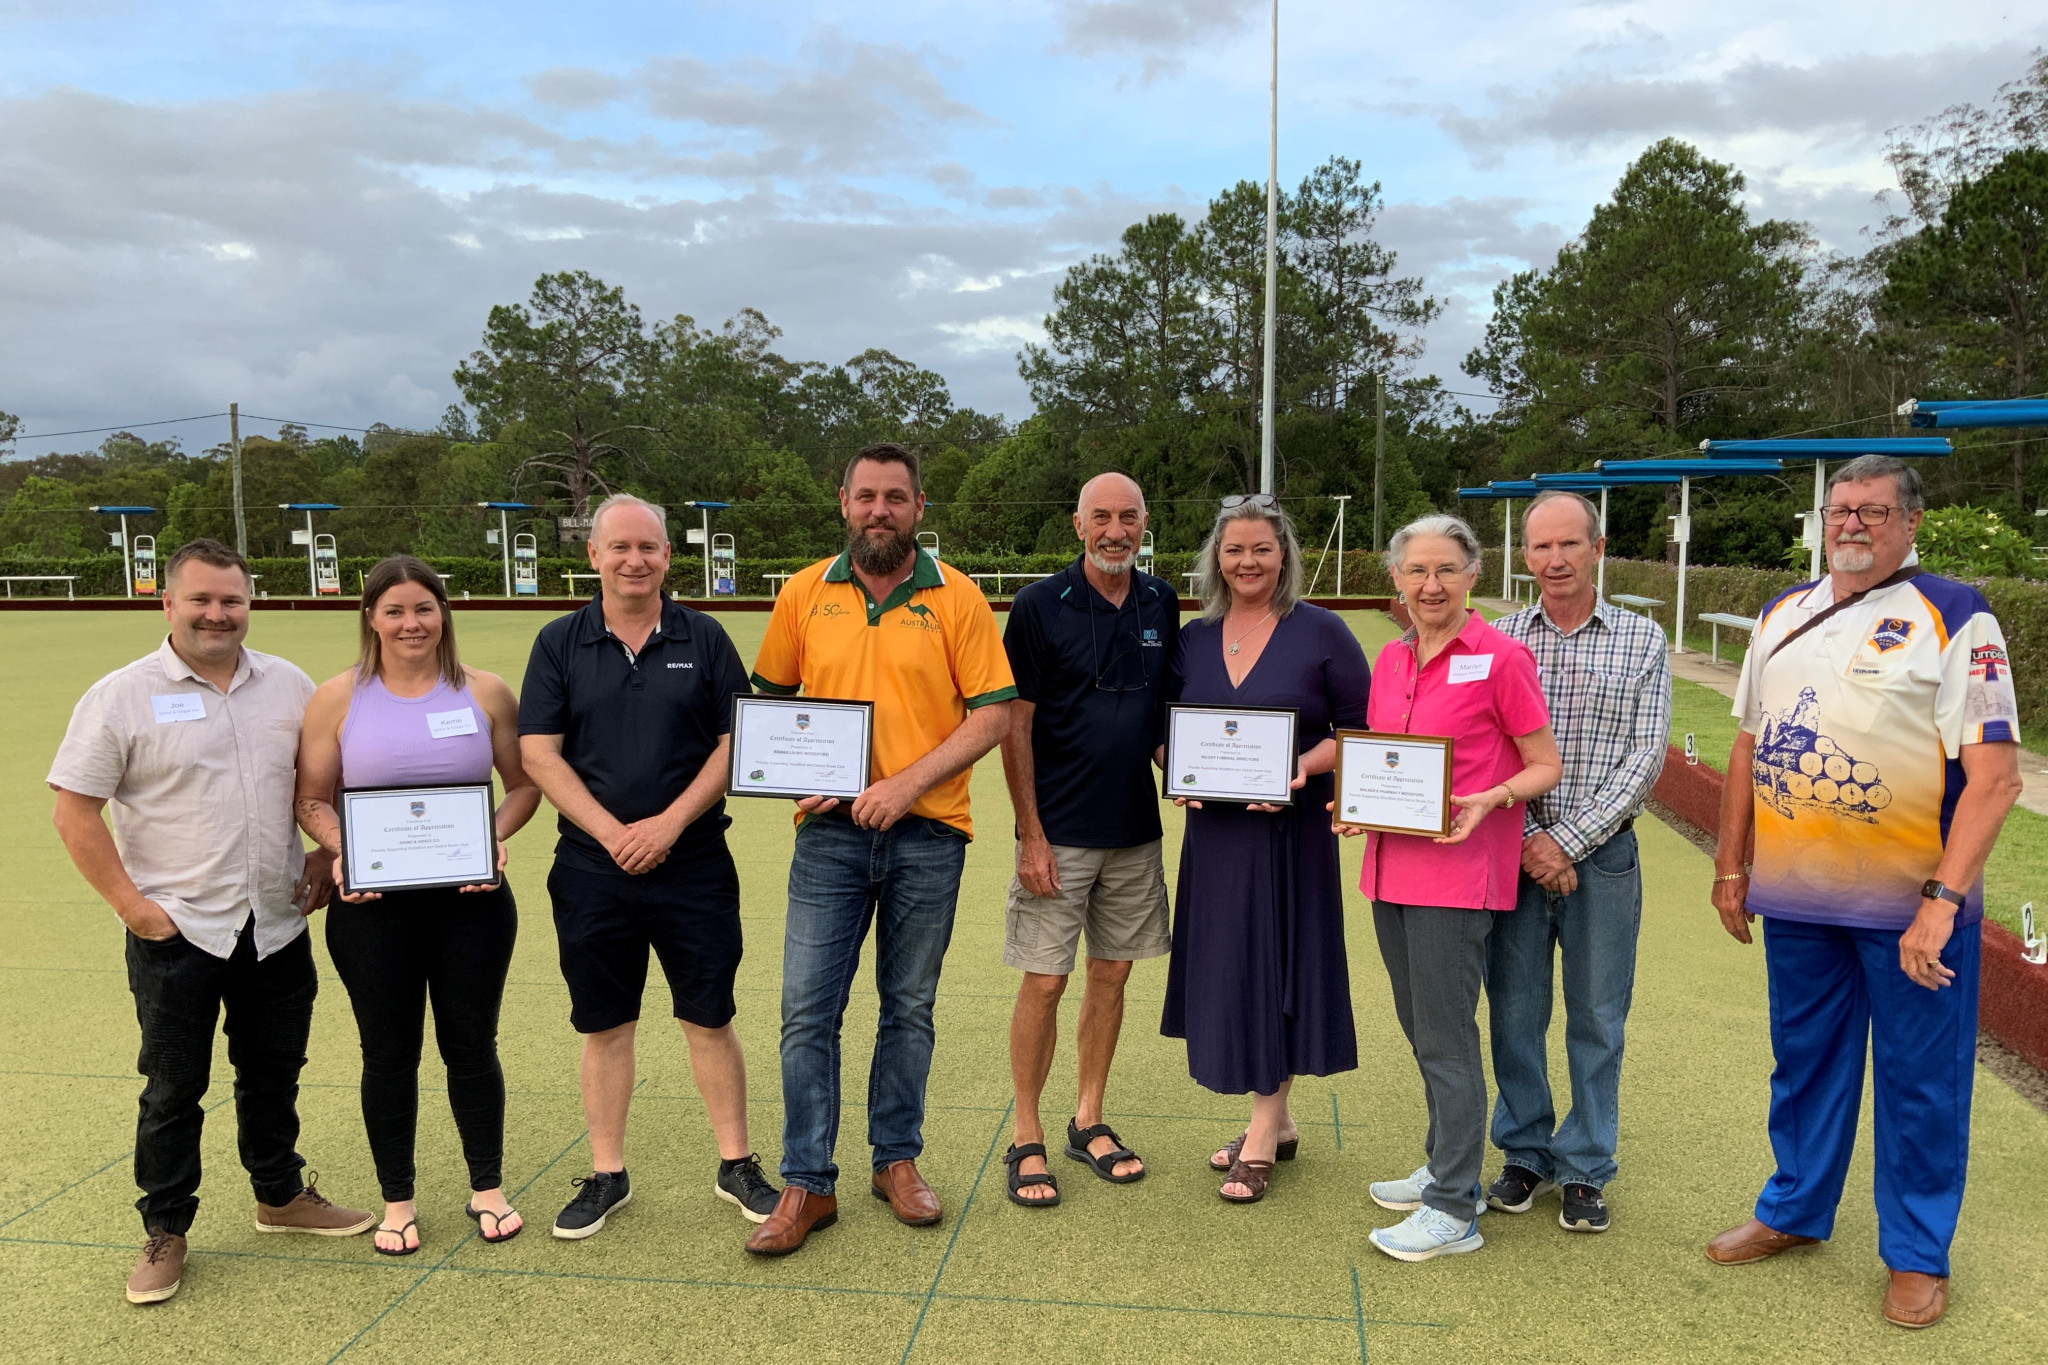 Joe VanScherpenseel, Kerri VanScherpenseel, Tim Facy, Chris Wease, Phillip Novella, Melissa Wyton, Marilyn Walker and Allan Walker (pictured with Ray Auer from the Woodford Bowls Club) were awarded certificates of appreciation before the Woodford Bowls Club unveiled its new floodlights.